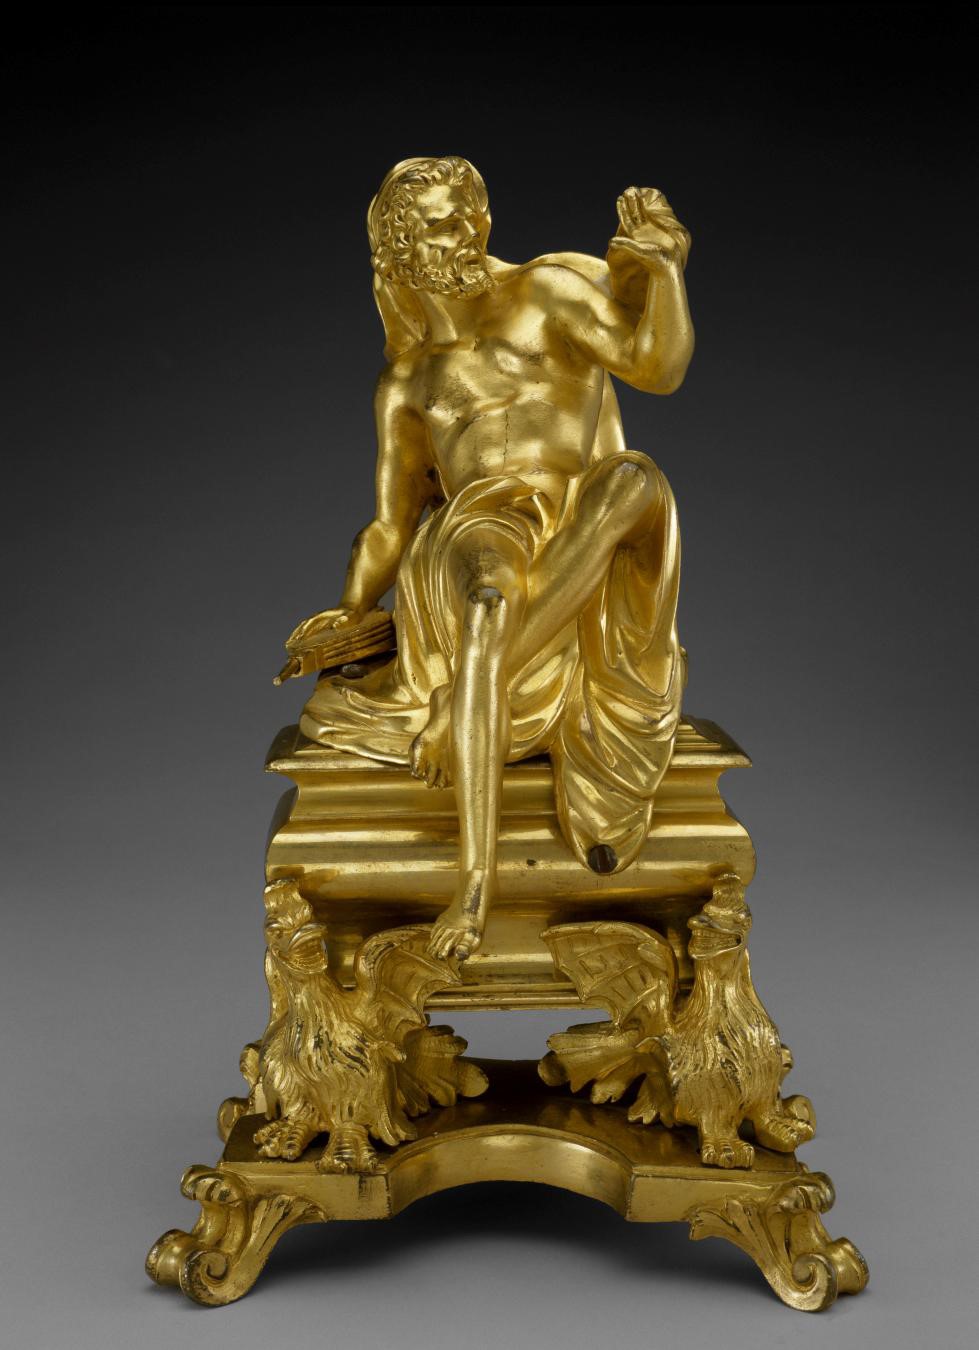 French, Chenet (one of a pair), c. 1710–40